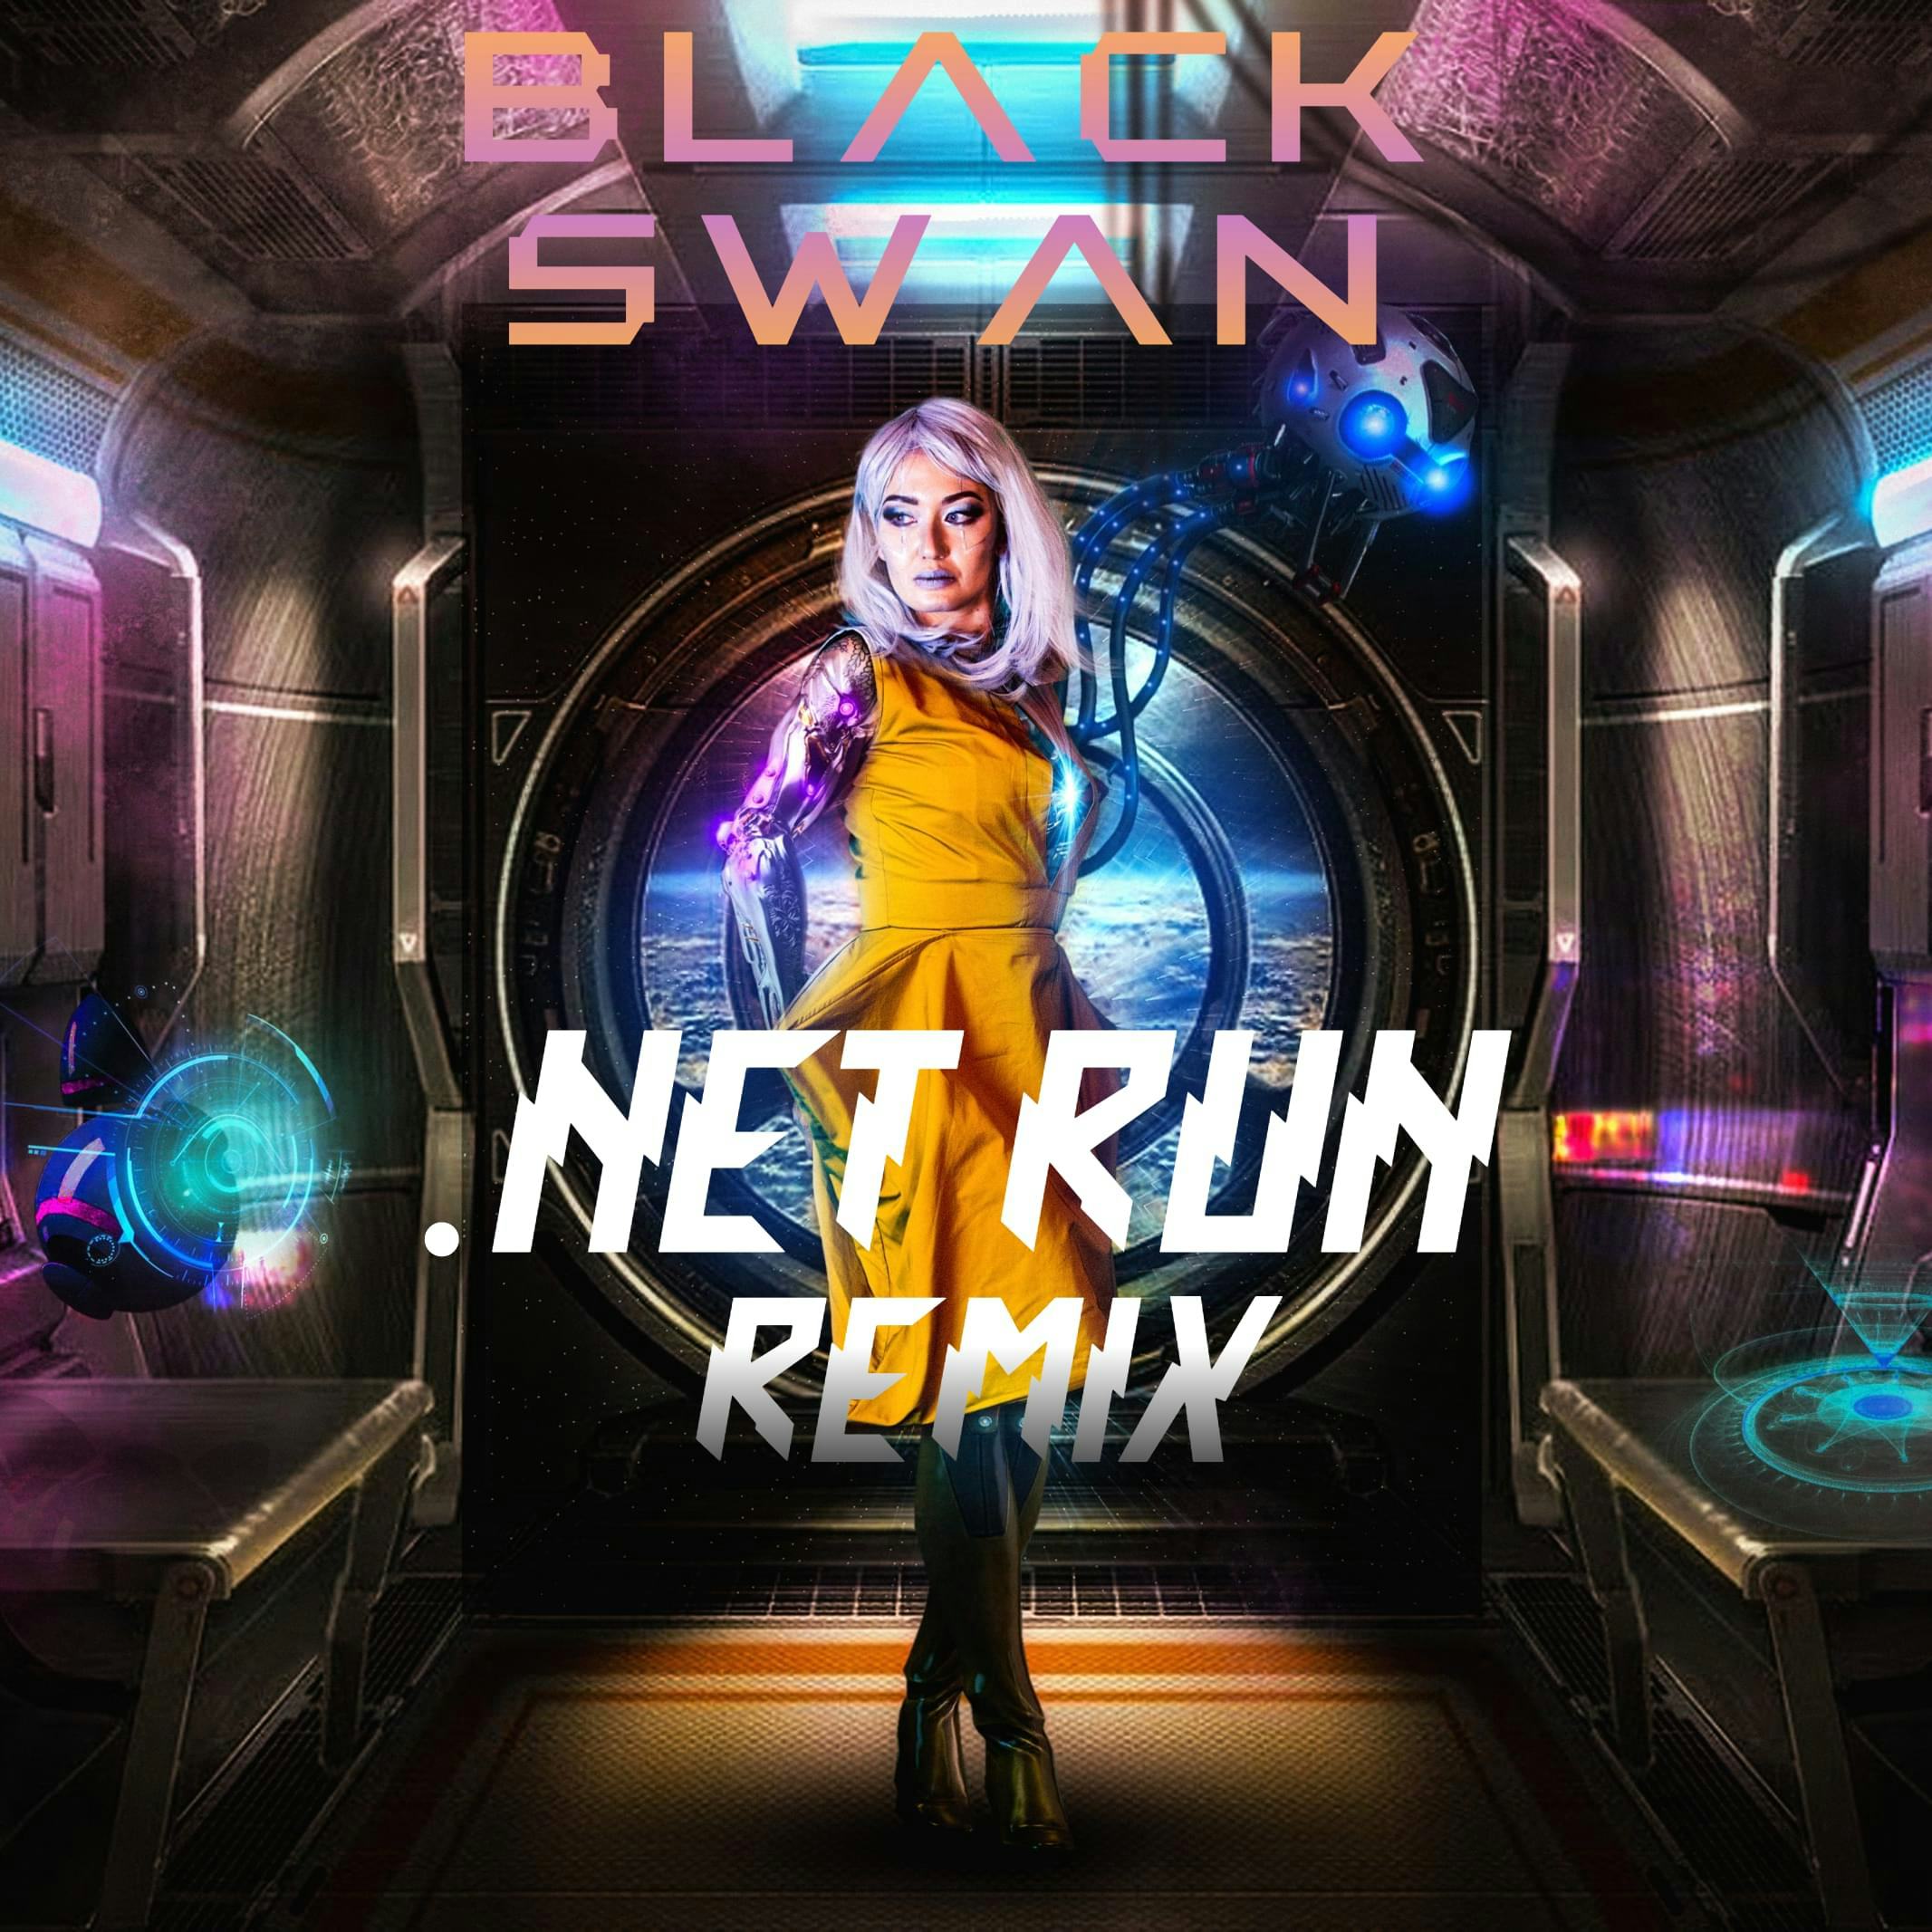 Cover art for Black Swan (.NET RUN remix) by the orphan block